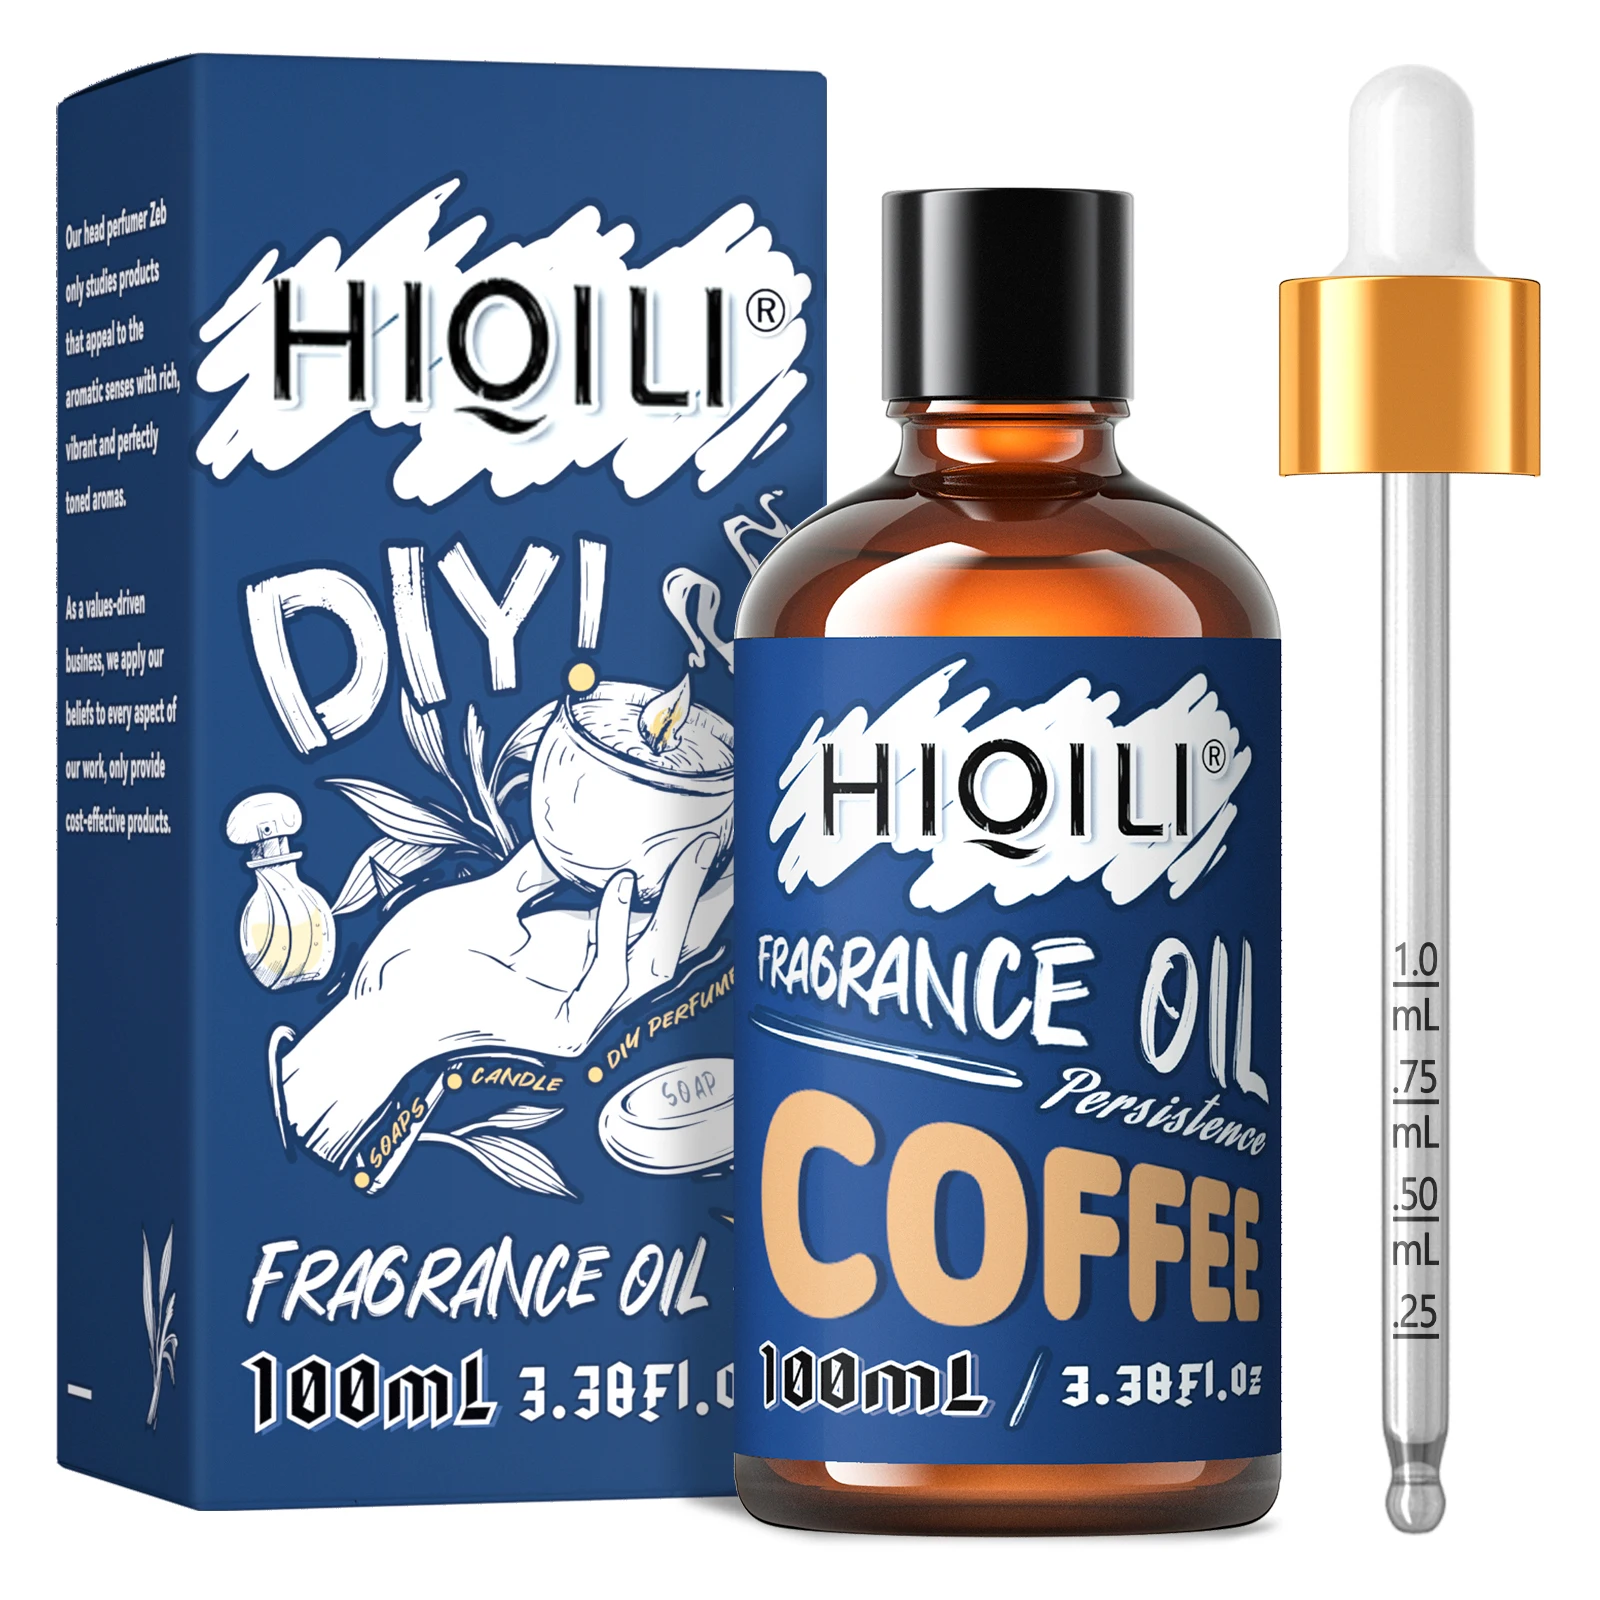 Coffee Fragrance Oils, HIQILI 100ML 100% Pure Oil For Aromatherapy,Car Diffuser,Humidifier,Room Spray,Candle Making,Gift,DIY 300ml double spray air humidifier fragrance diffuser usb ultrasonic essential oils diffuser nano steaming face aromatherapy